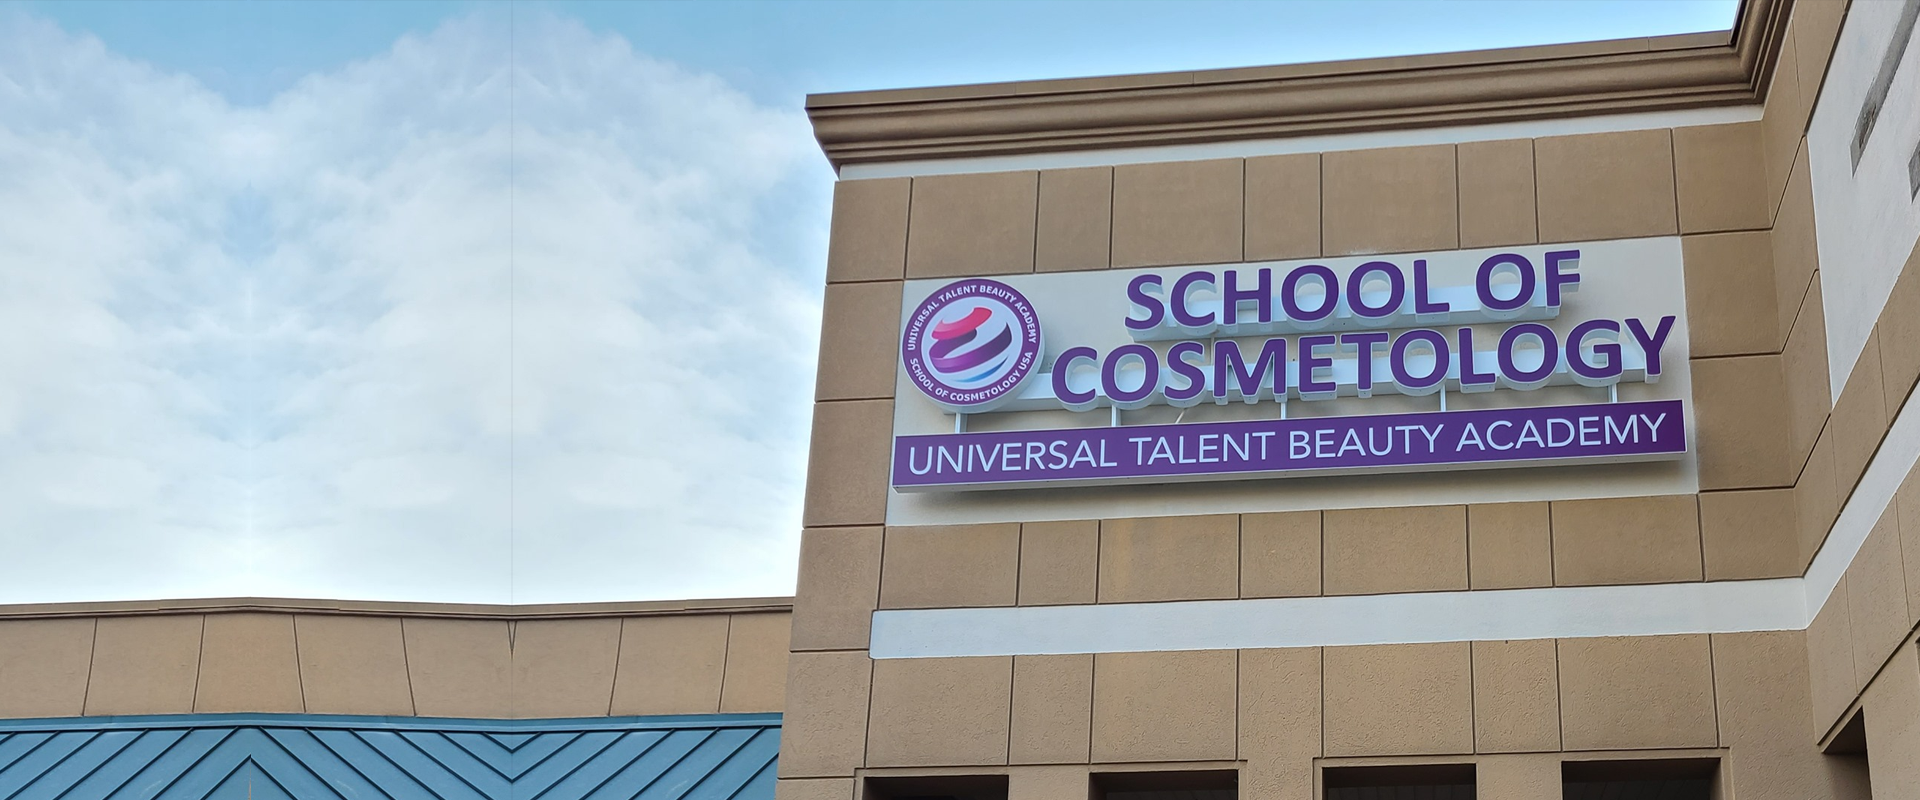 Your career in cosmetology awaits!